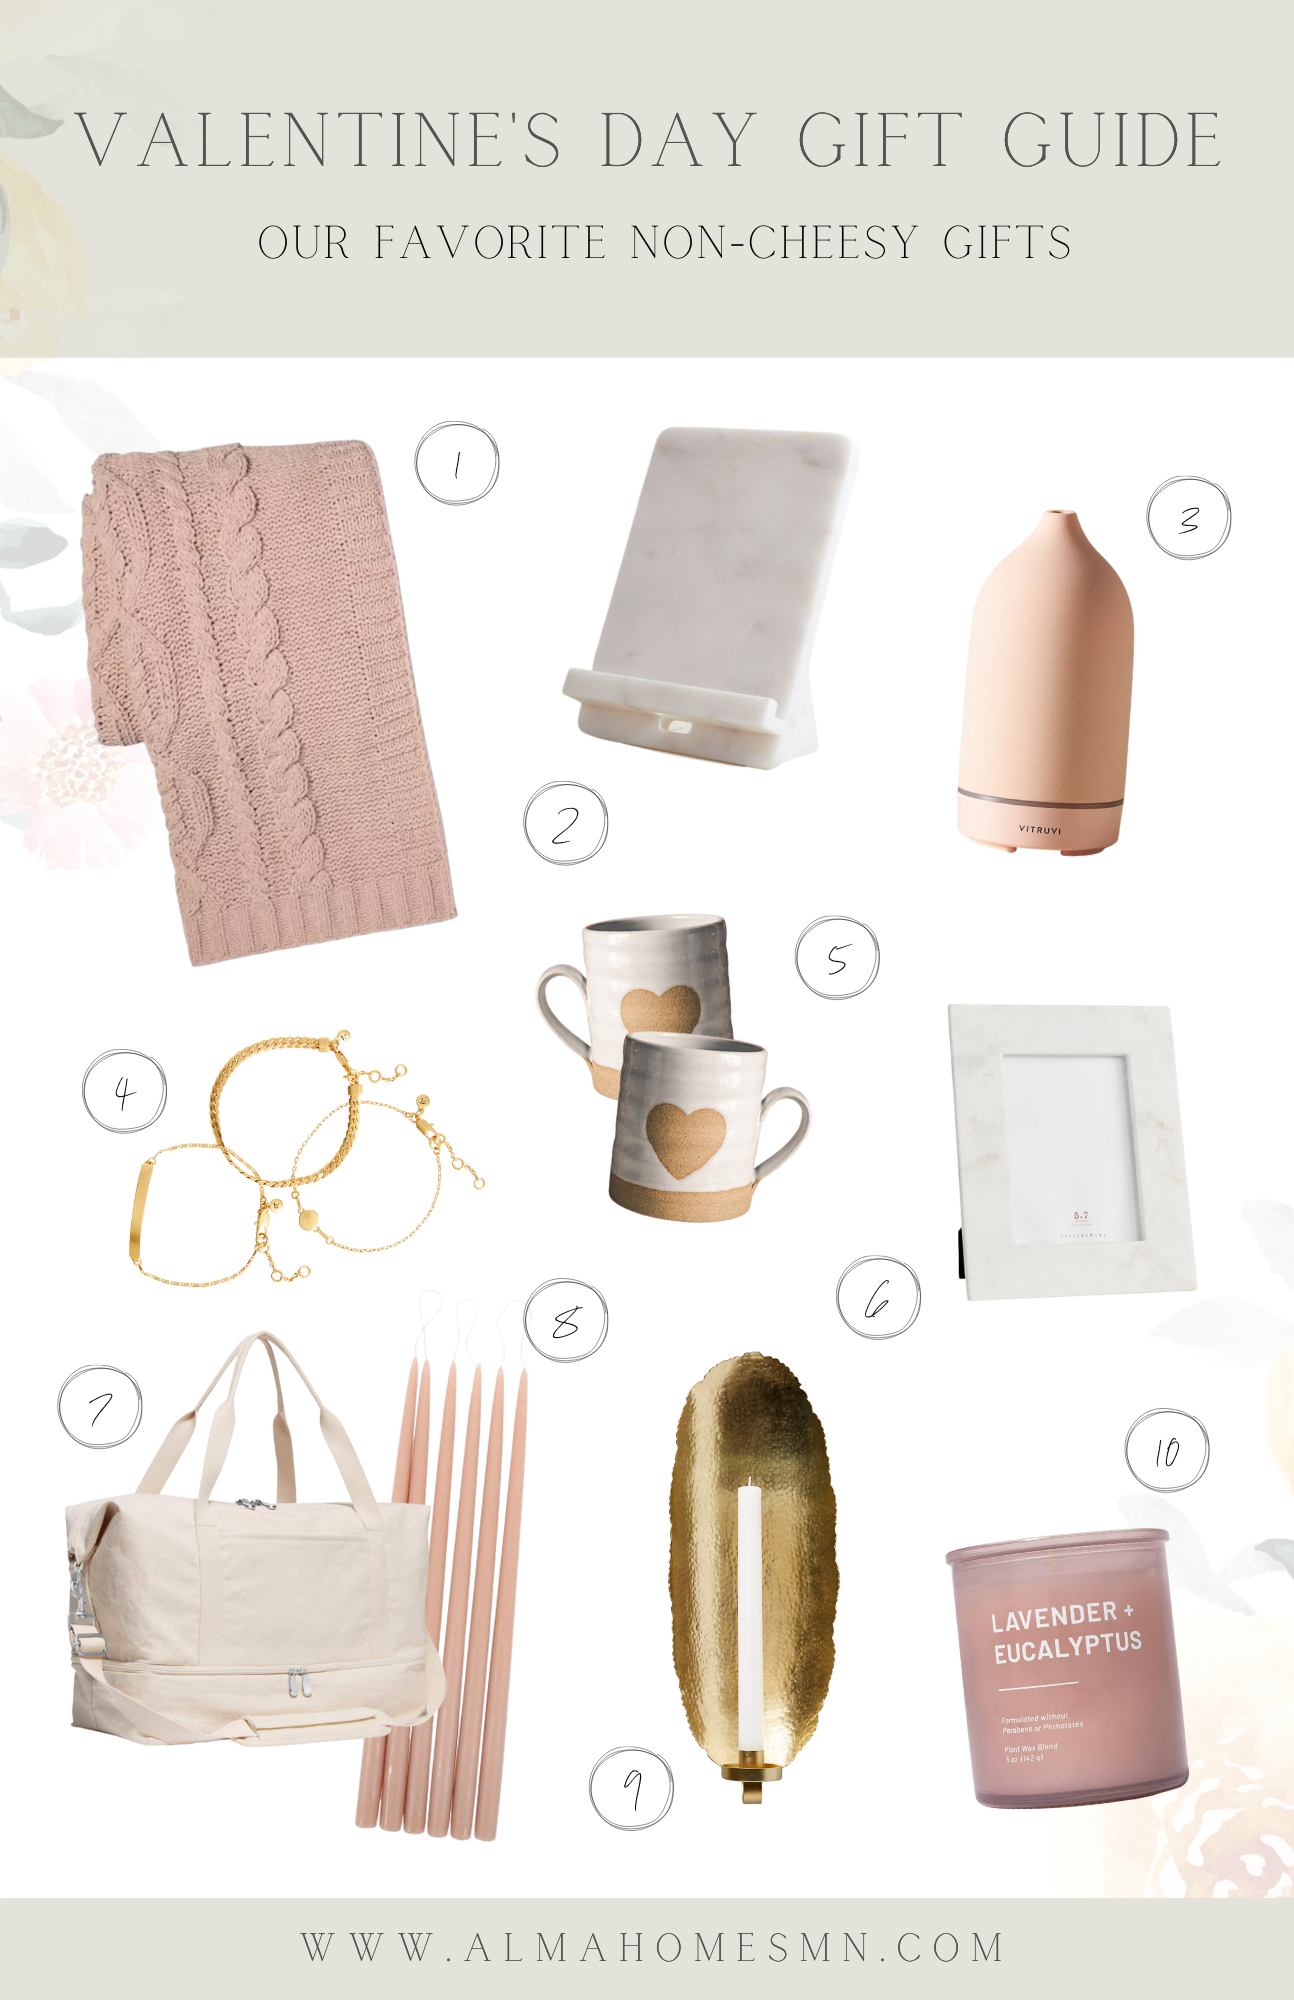 Valentine's Day Gift Guide Blog Graphic